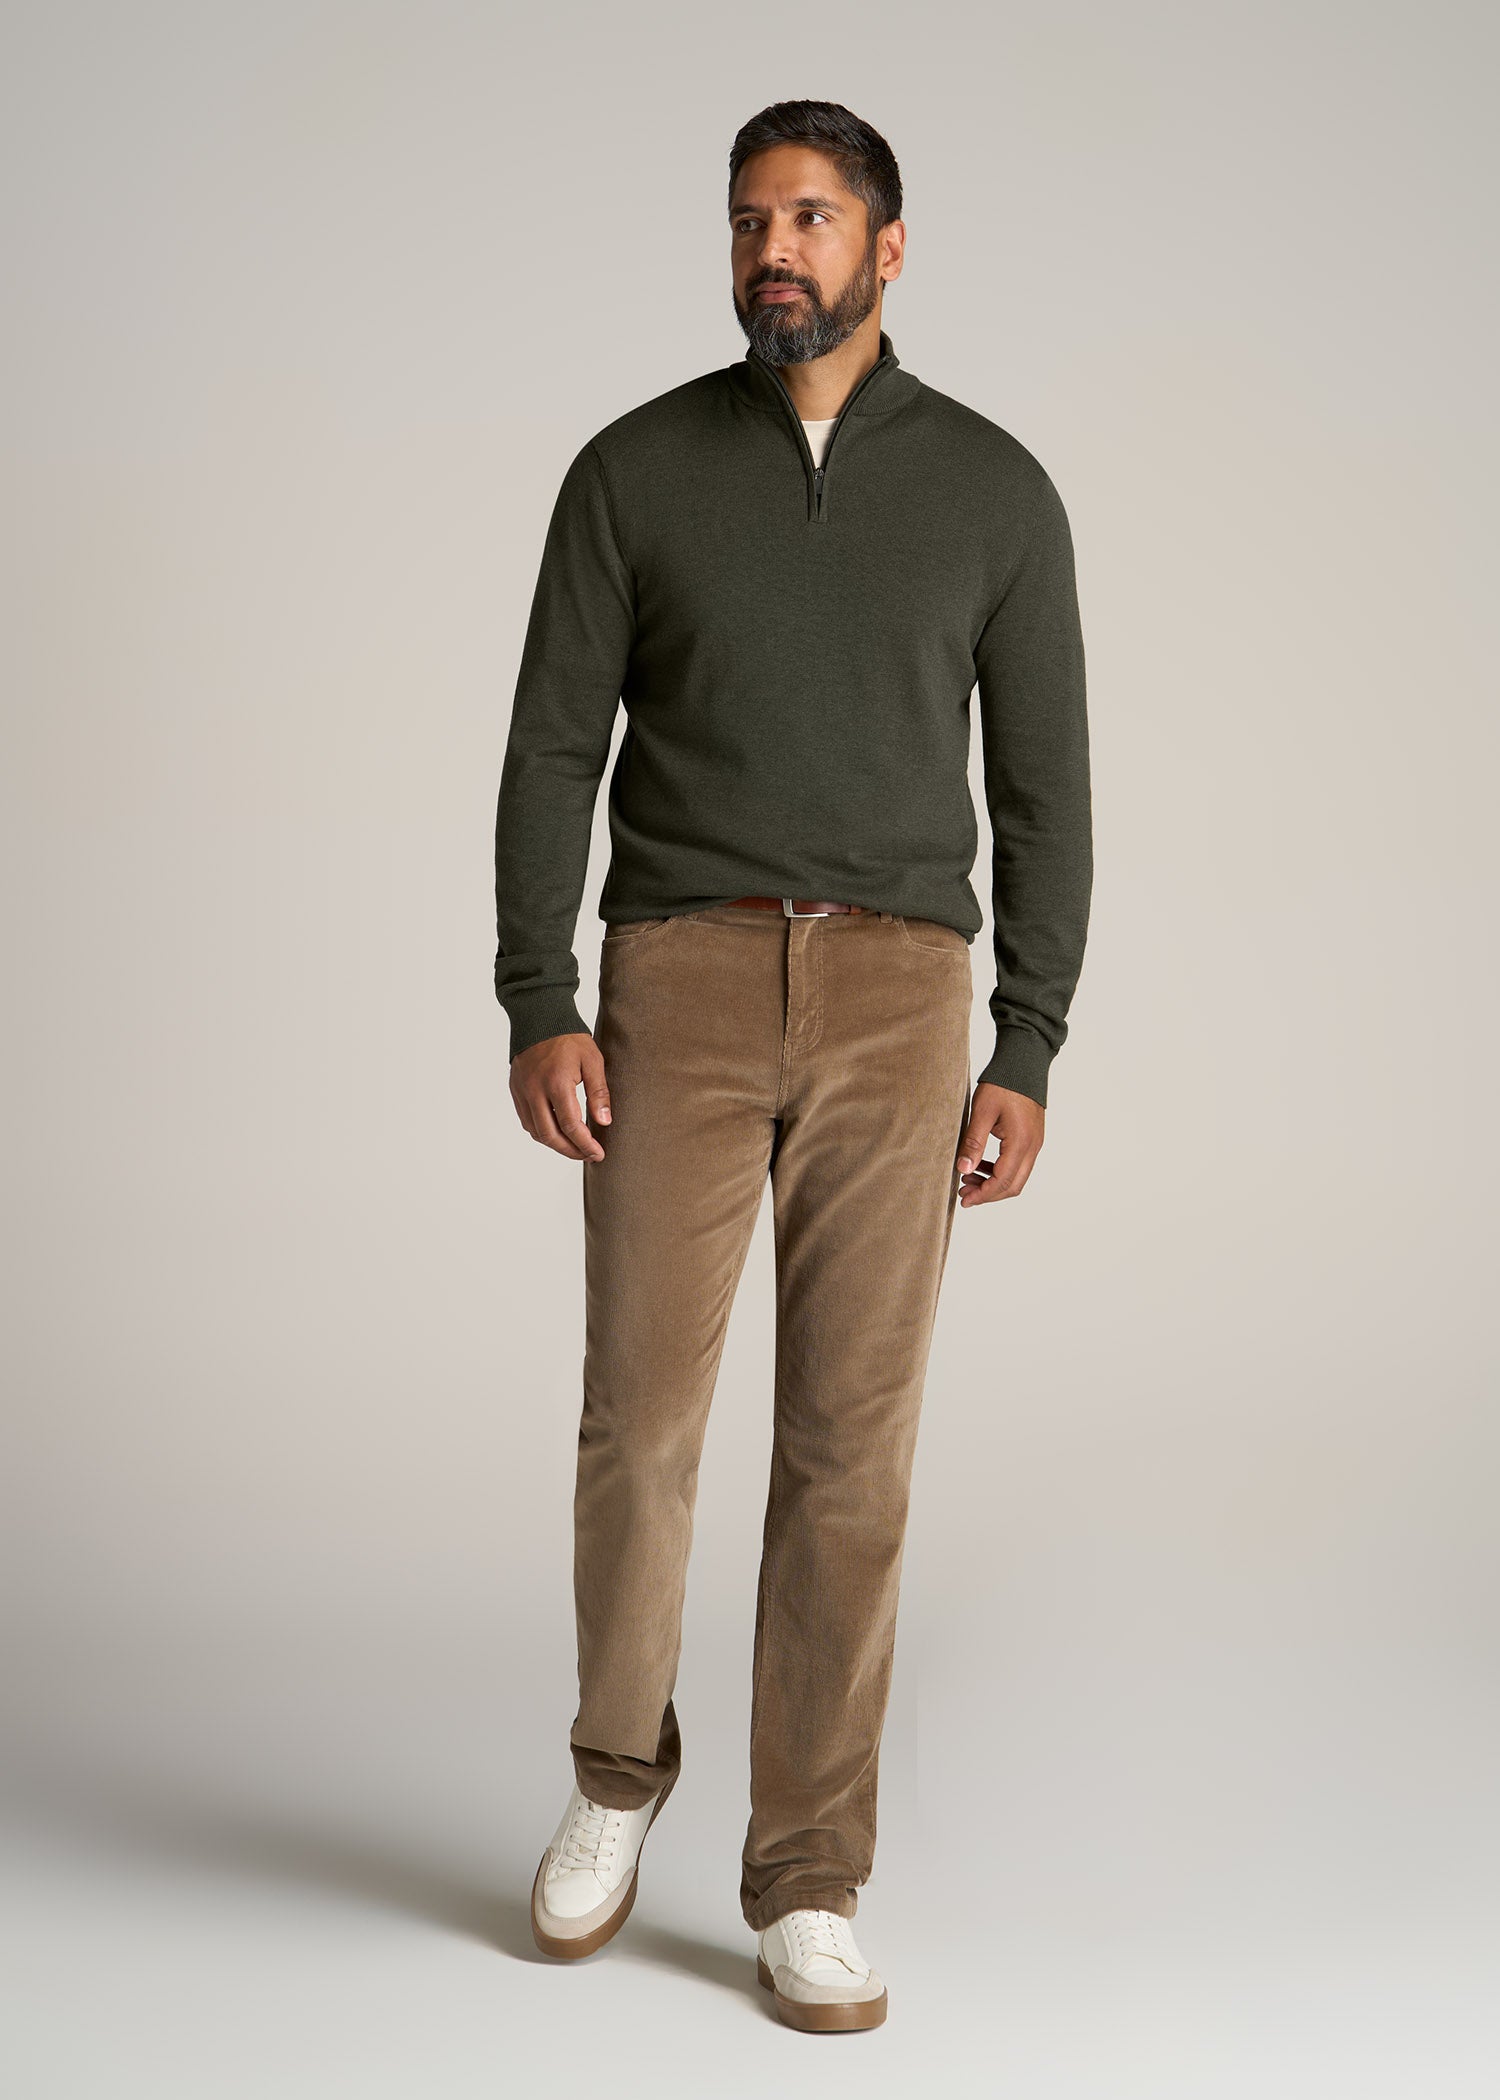 Everyday Quarter-Zip Tall Men's Sweater in Charcoal Mix